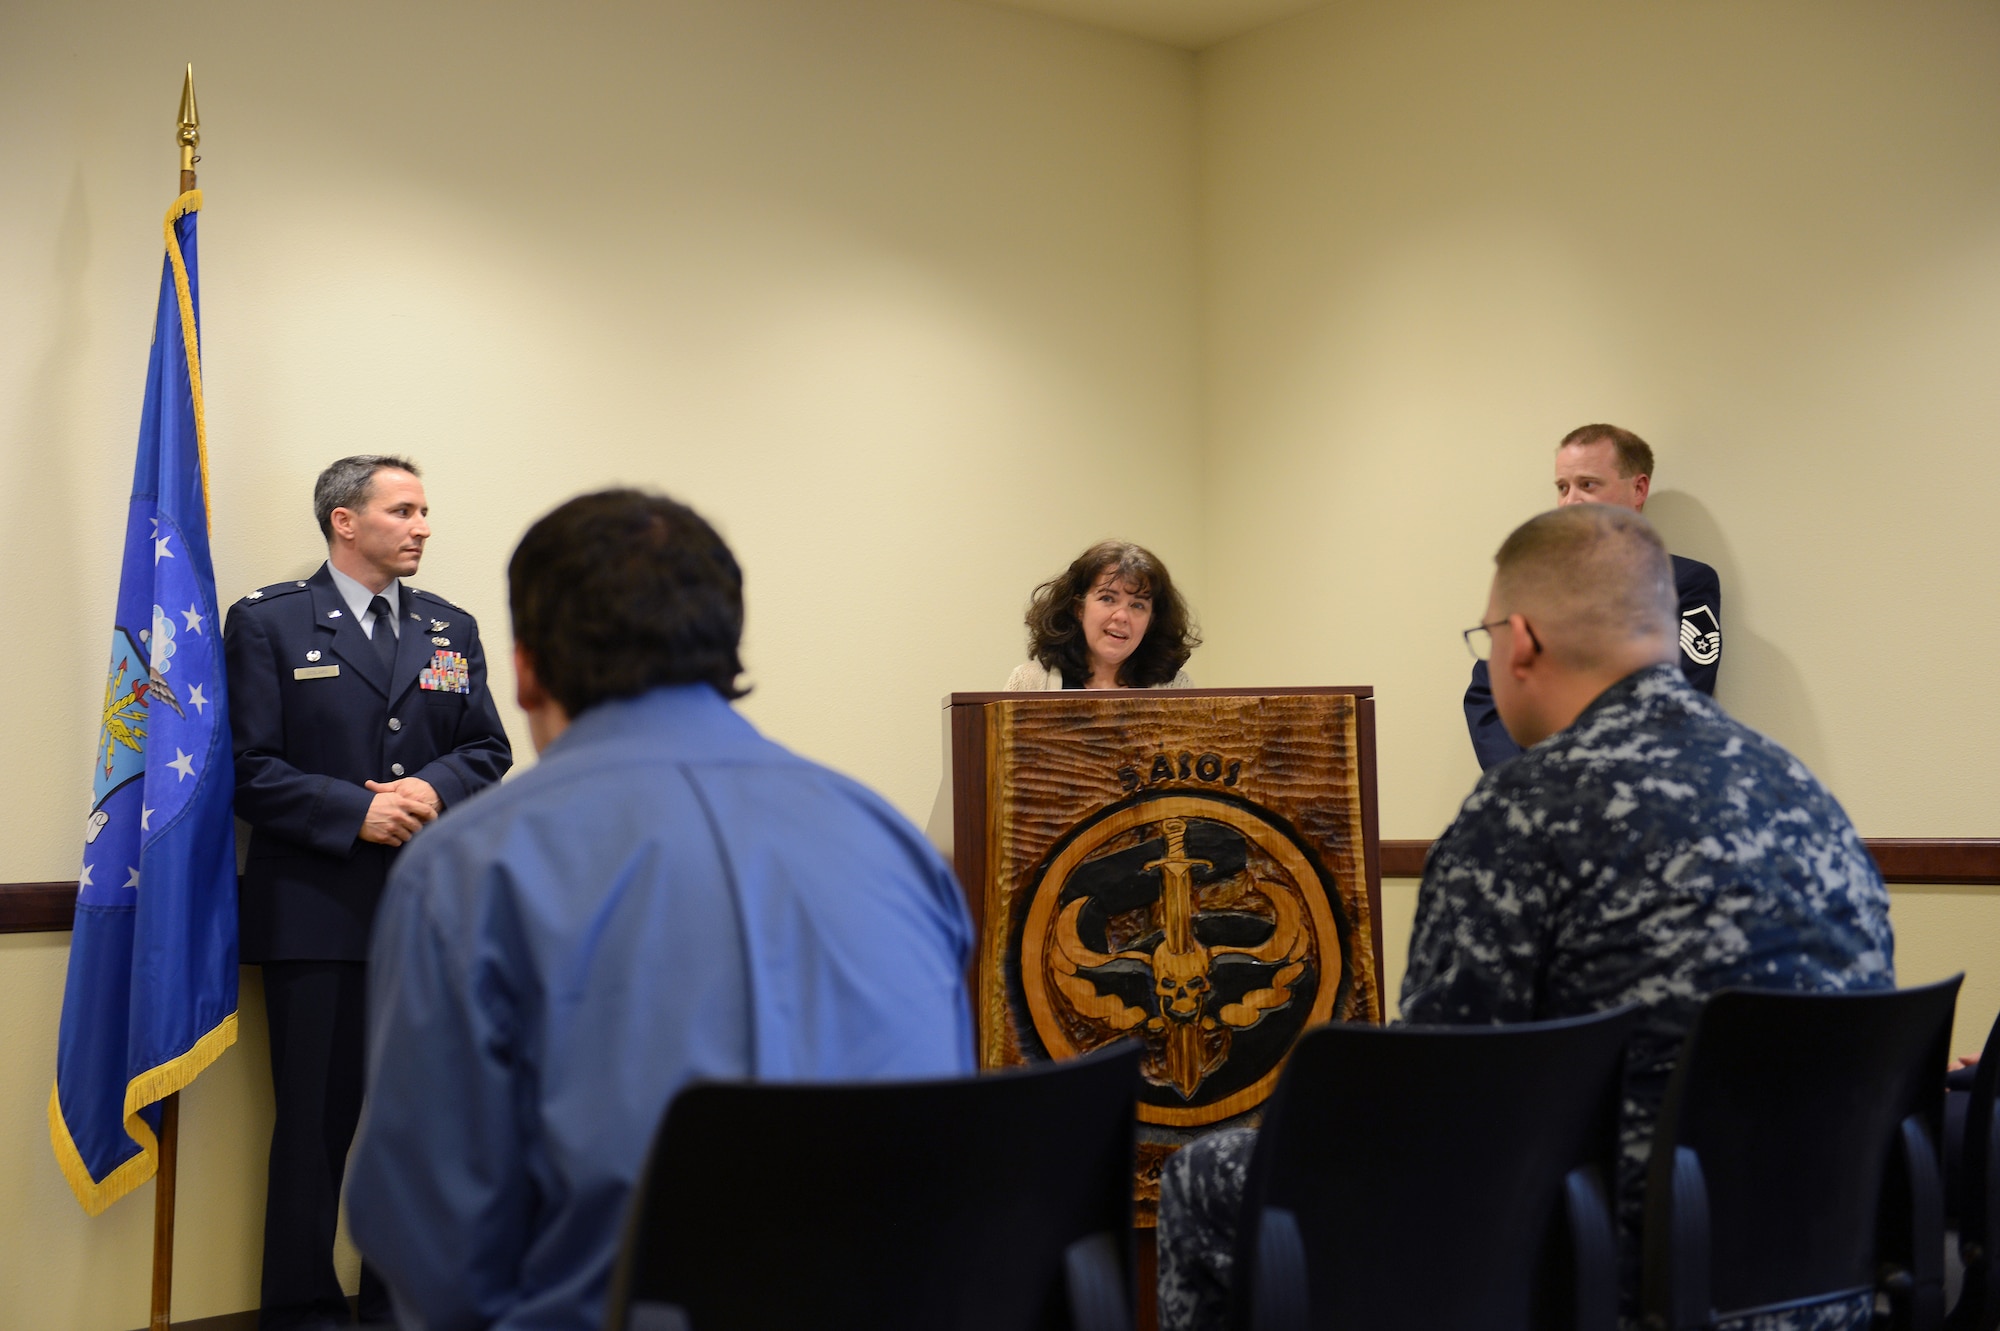 Jennifer Auchman (middle), wife of Master Sgt. Steven Auchman, shares a few words with the members of the 5th Air Support Operations Squadron Nov. 21, 2014, during the Auchman Auditorium Dedication Ceremony at Joint Base Lewis-McChord, Wash. The ceremony was given 10 years after Master Sgt. Steven Auchman was killed from the injuries sustained during a mortar attack in Mosul, Iraq. (U.S. Air Force photo/Airman 1st Class Keoni Chavarria)